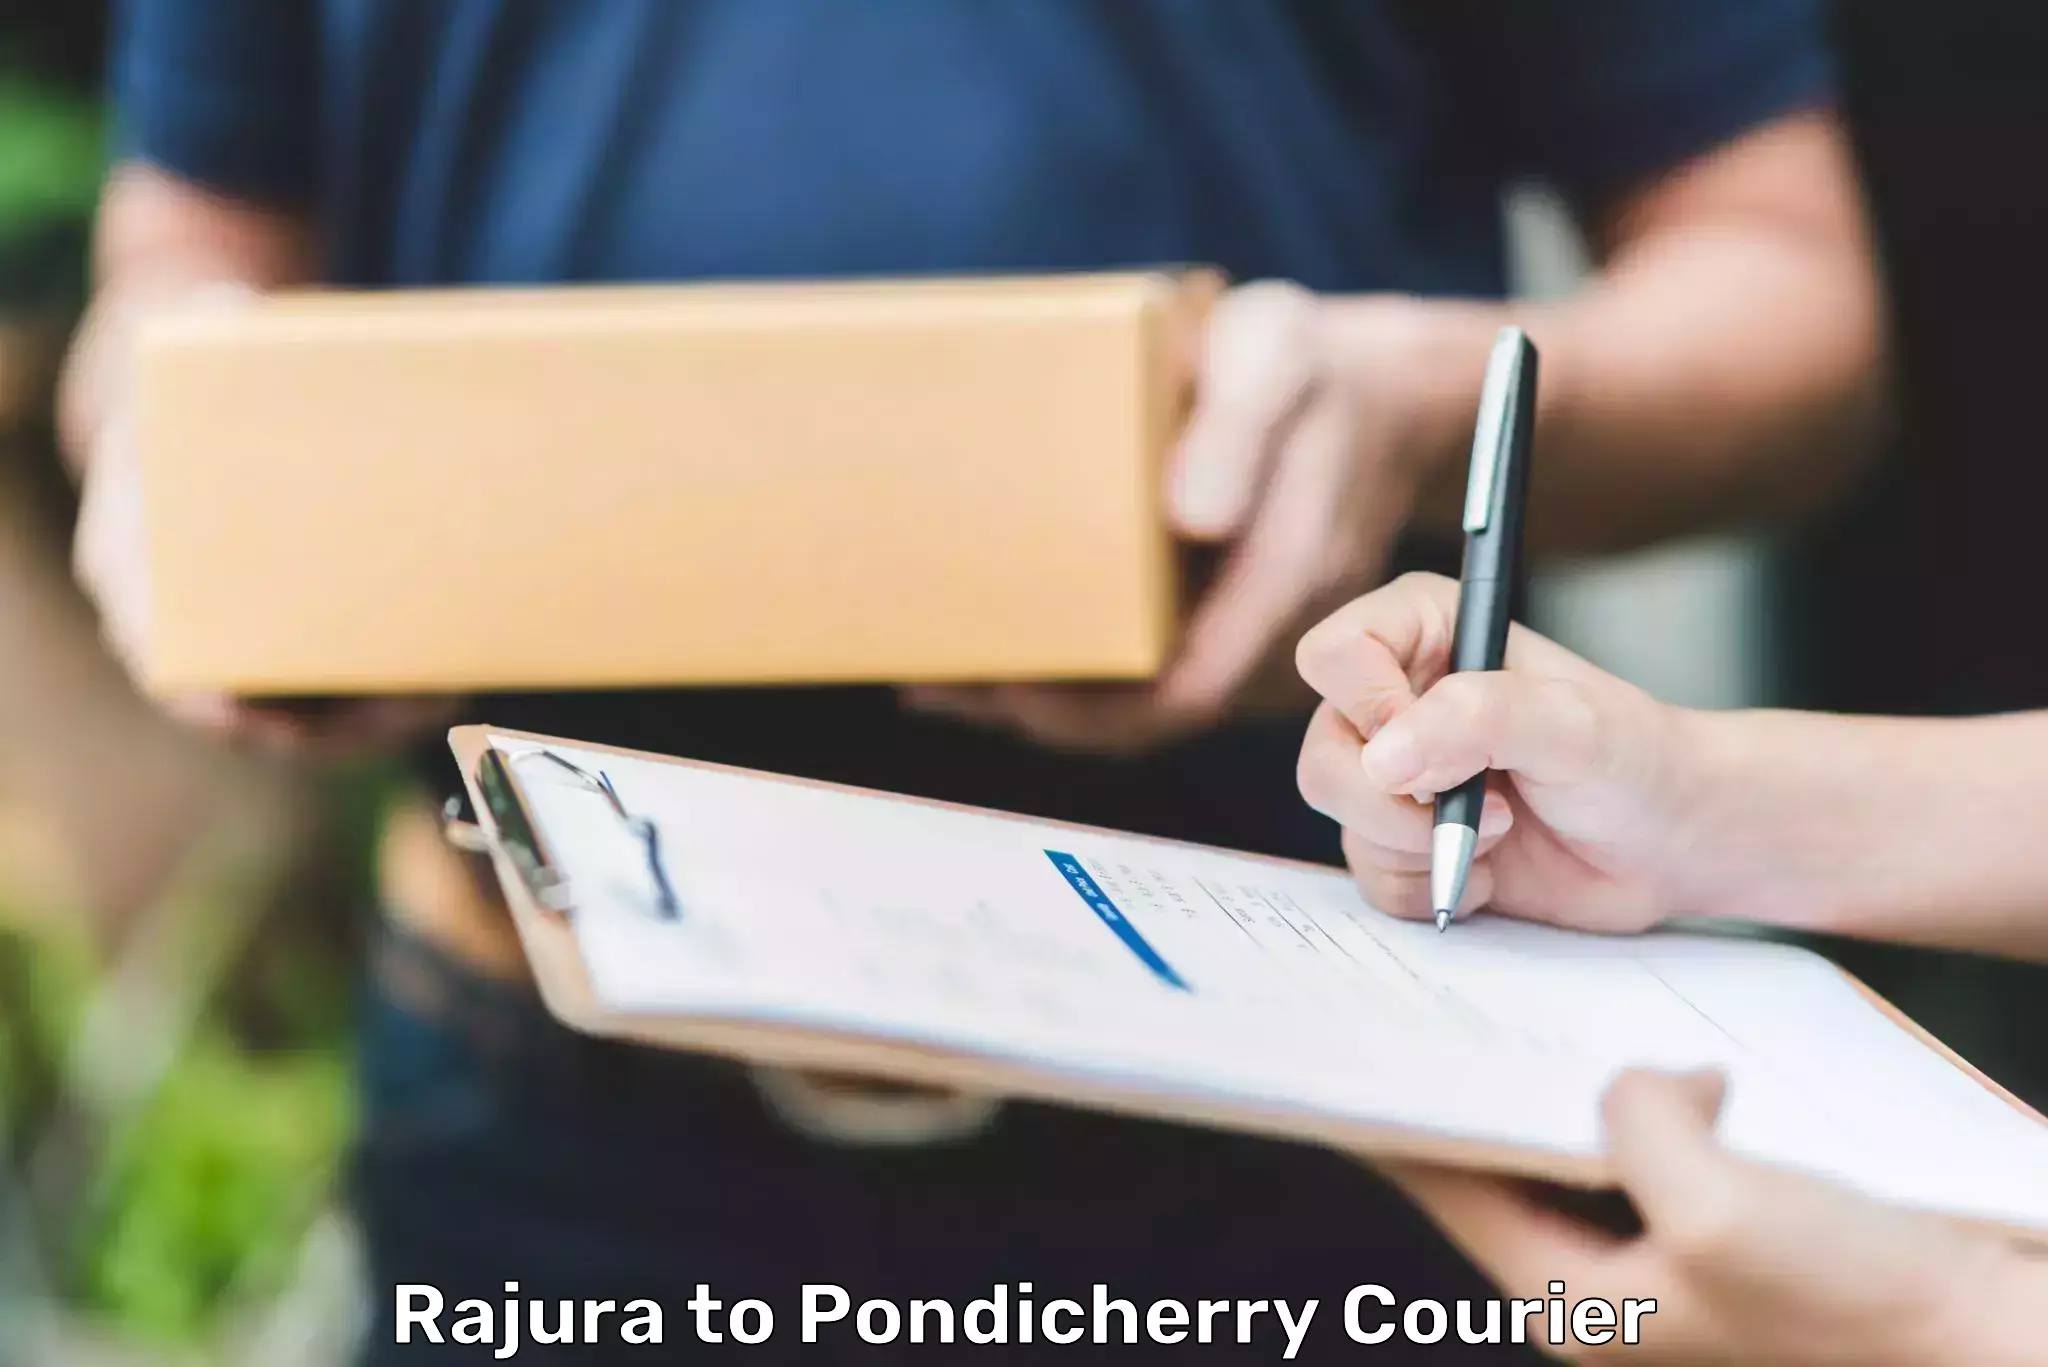 Package delivery network Rajura to Pondicherry University